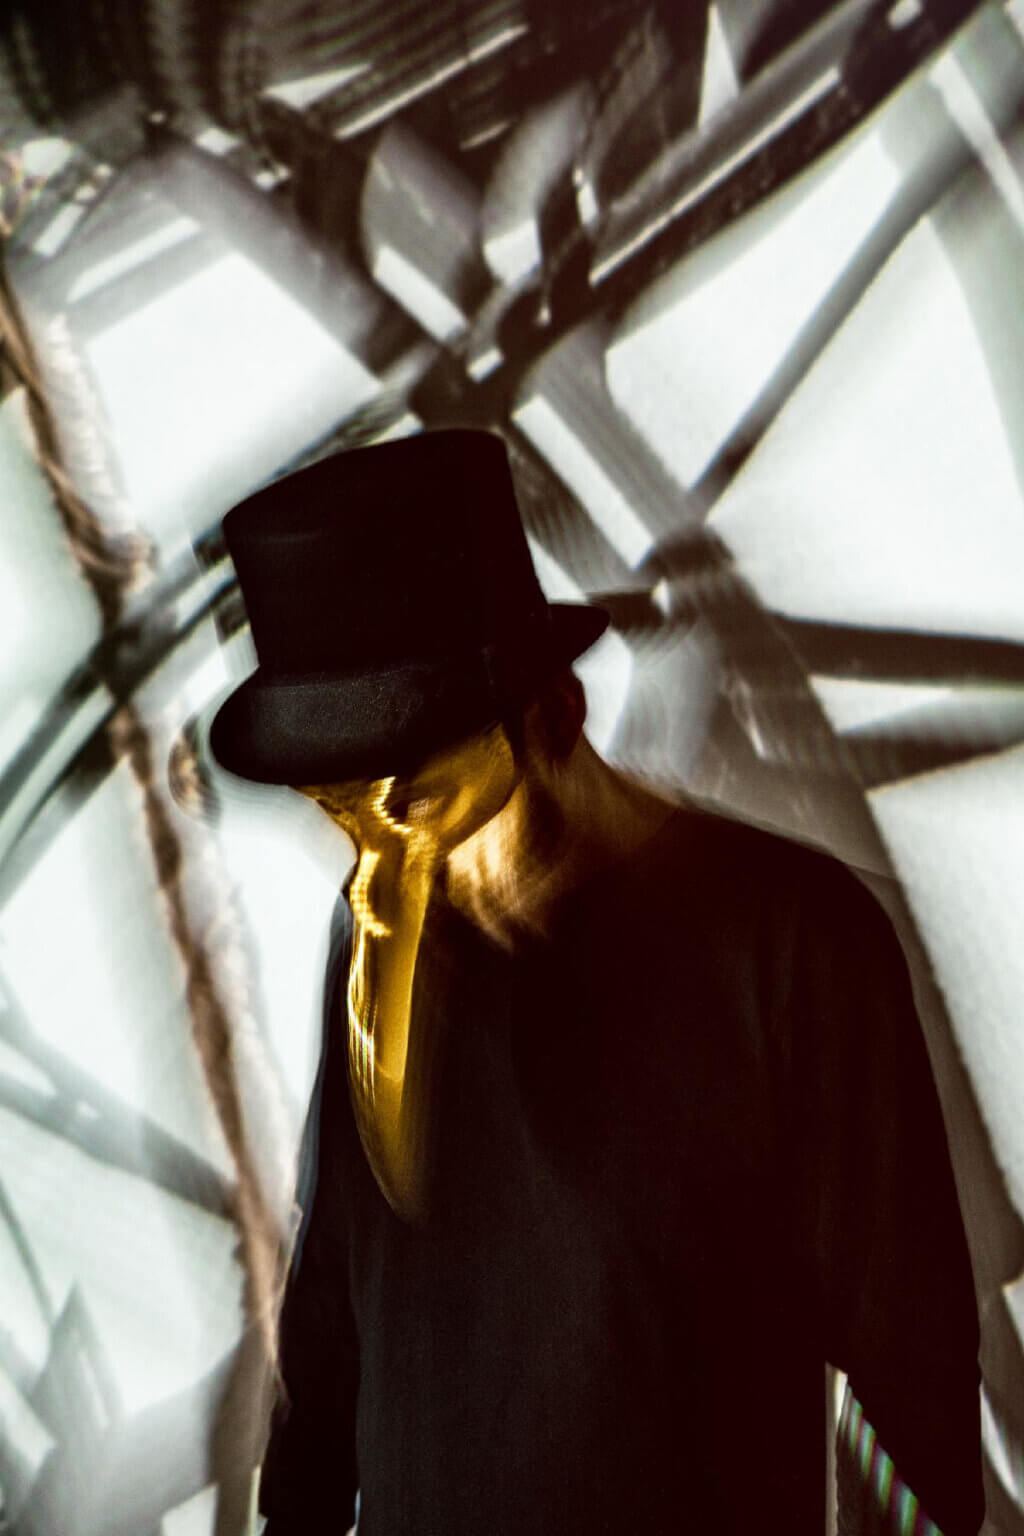 Claptone has shared new track "My Night" featuring electronic indie duo APRE. Accompanying the track, Claptone has also shared an '80s cult